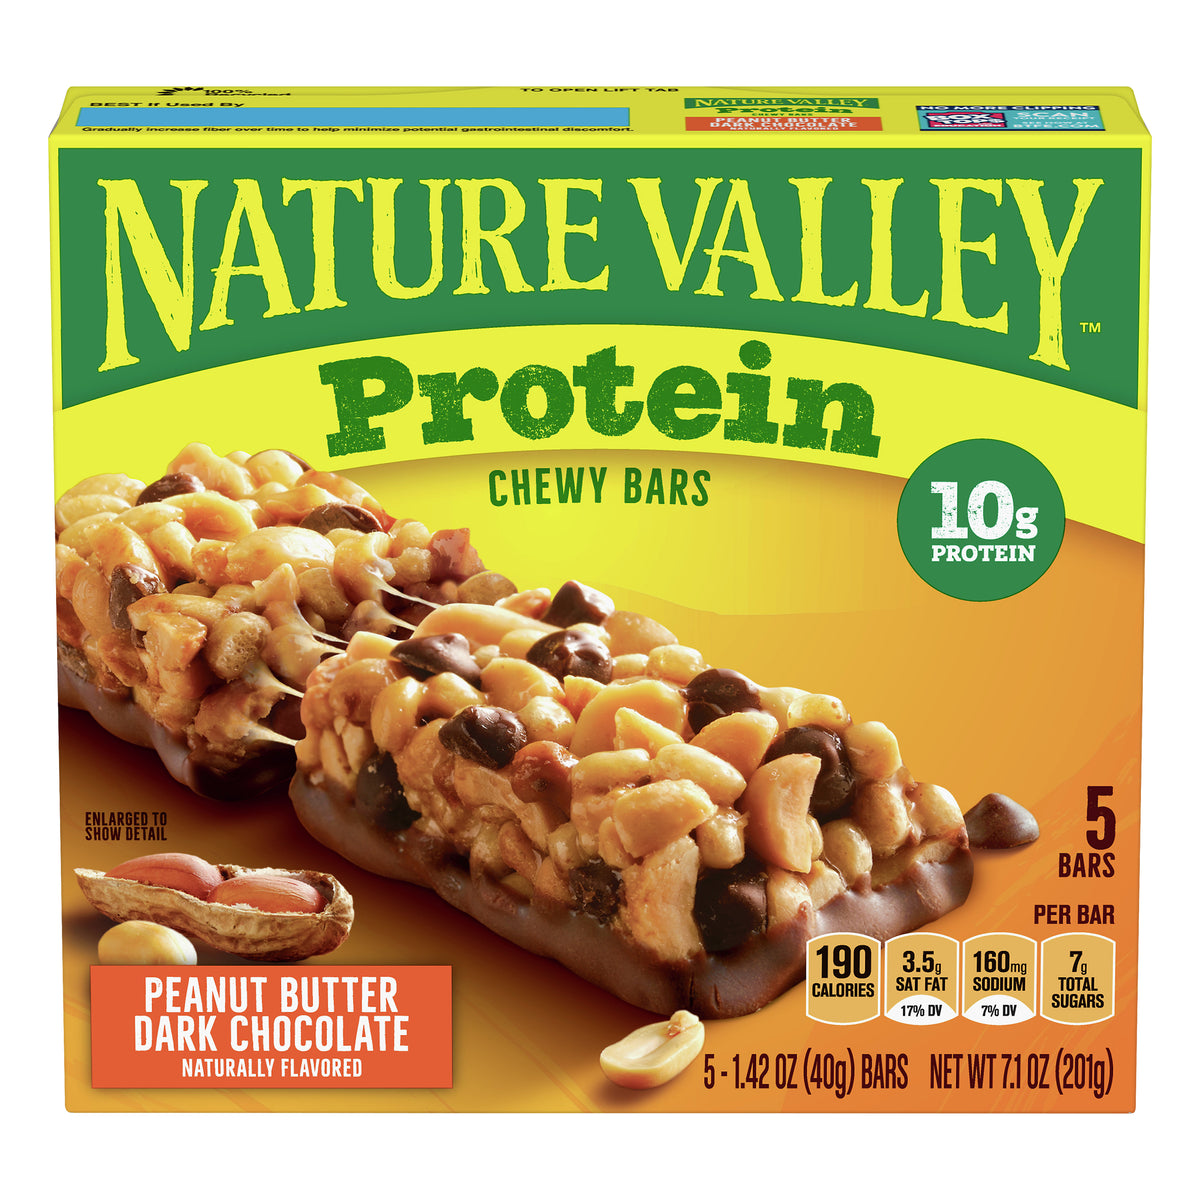 Nature Valley Peanut Butter Dark Chocolate Protein Chewy Bars (30